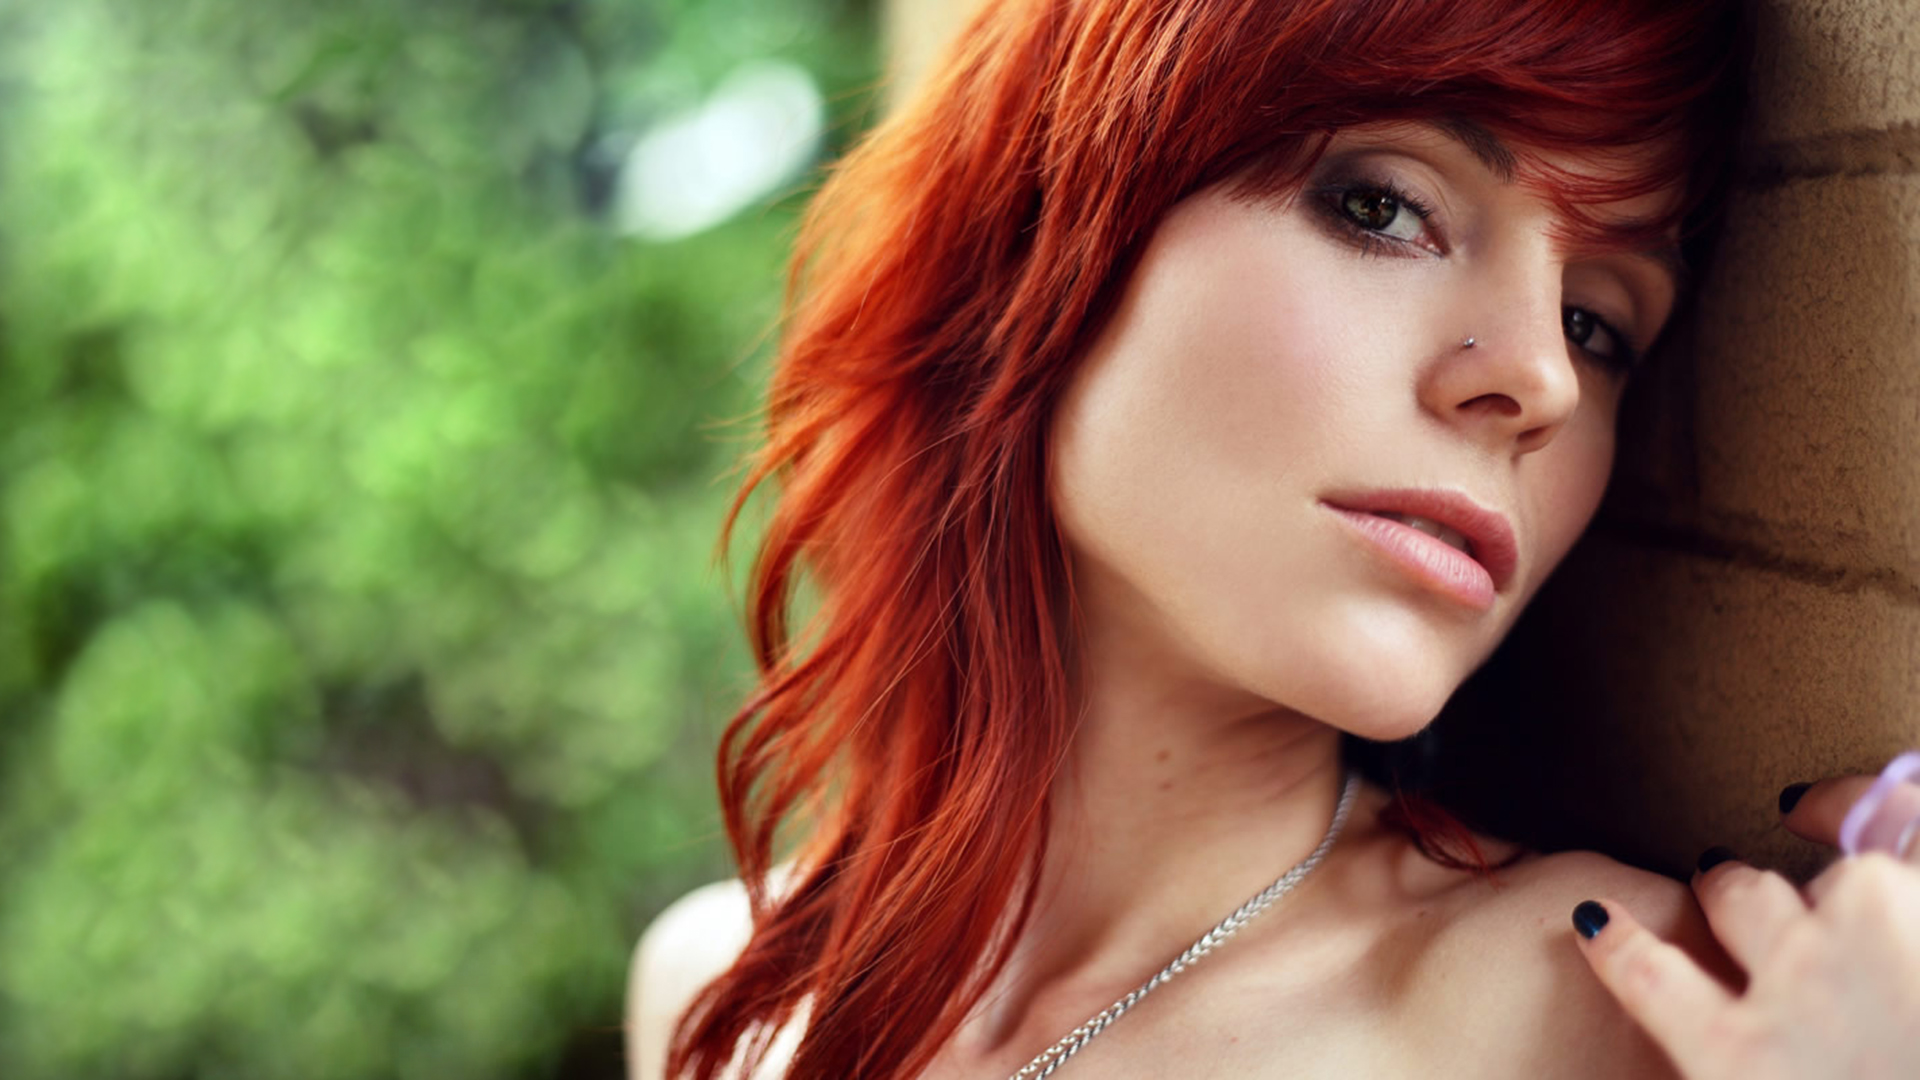 Redhead Girl Wallpaper Archives Of